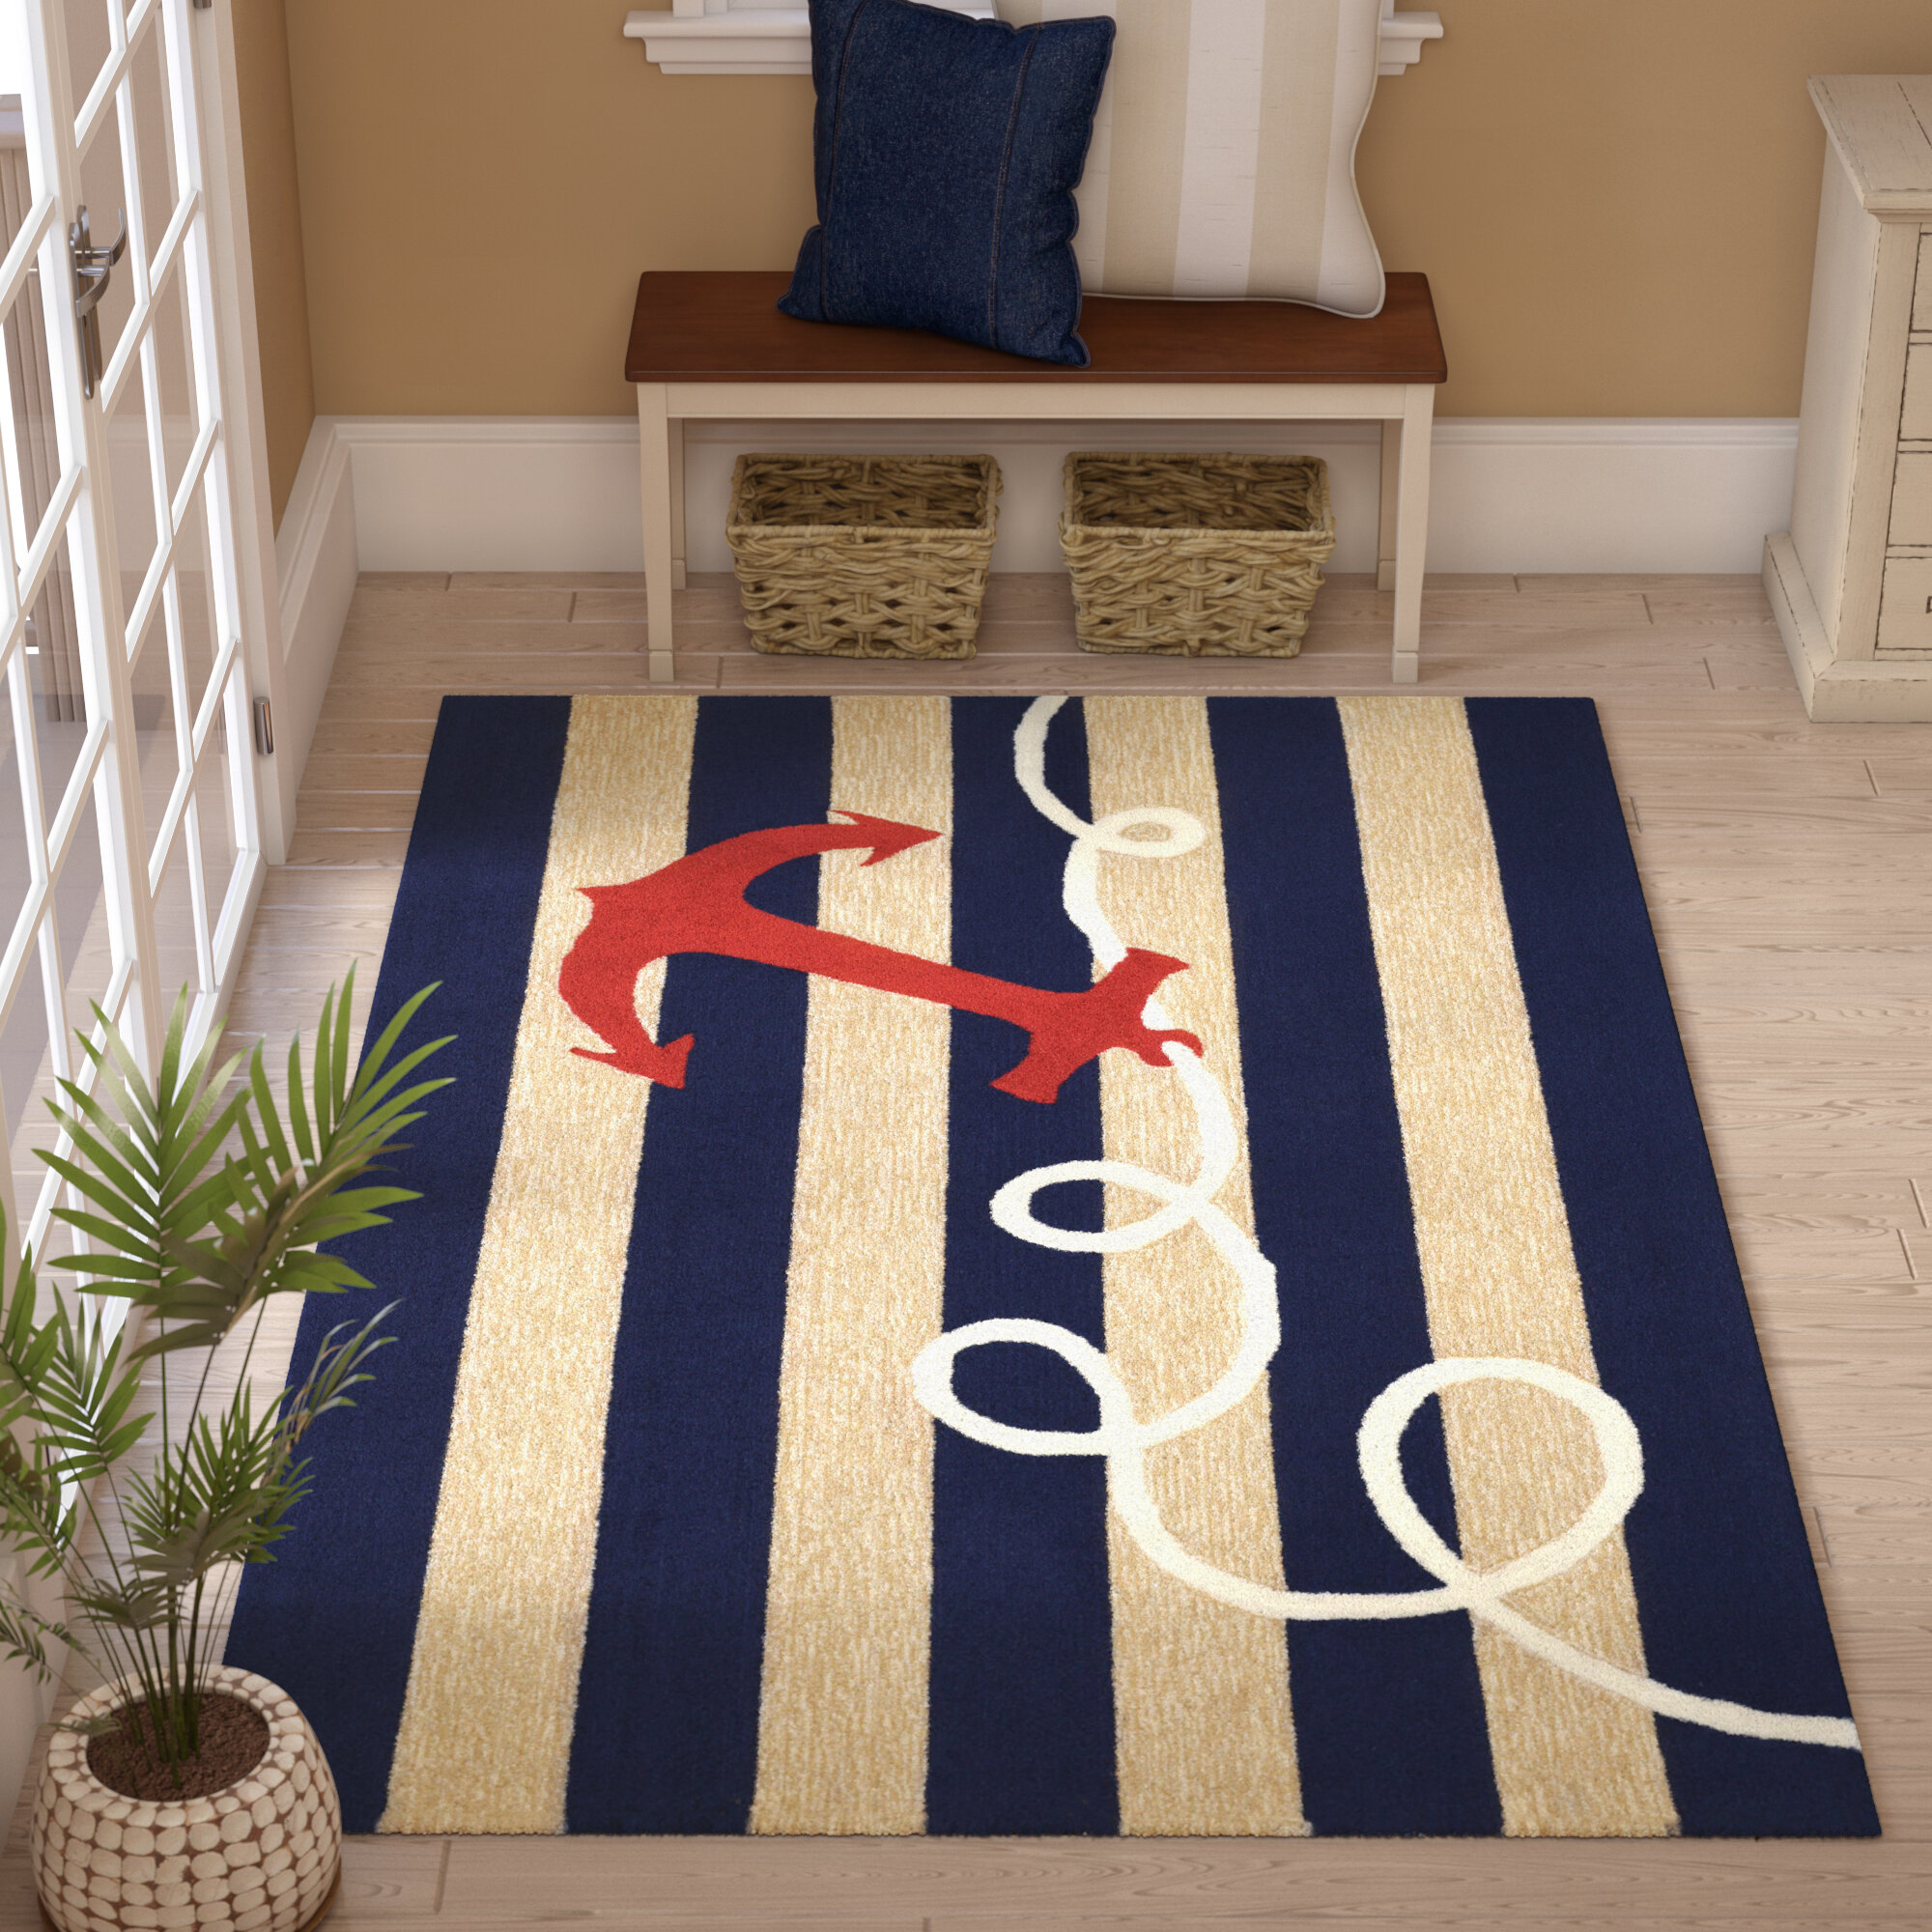 Red Nautical Anchor Entry Way Outdoor Door Mats Welcome Rugs with Navy Blue and 